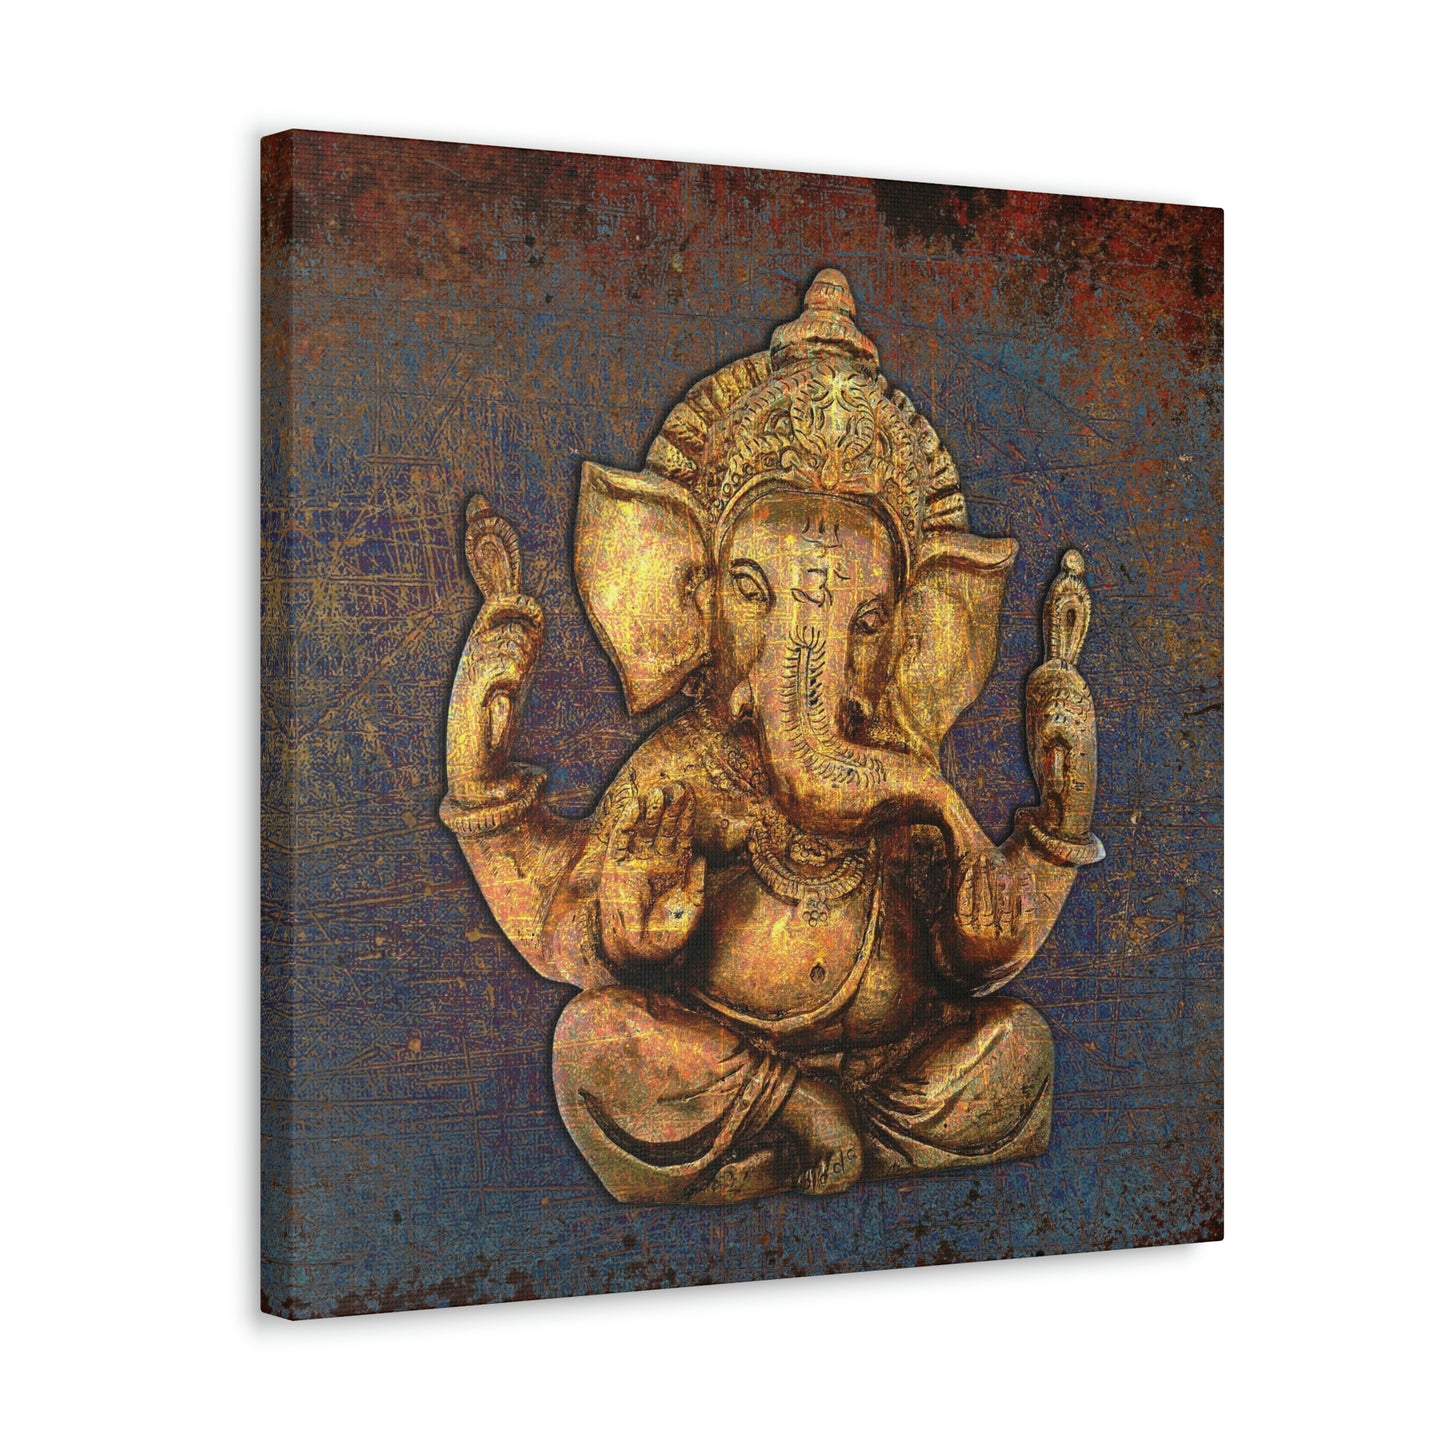 Ganesha on a Distressed Purple and Orange Background Printed on Unframed Stretched Canvas side view